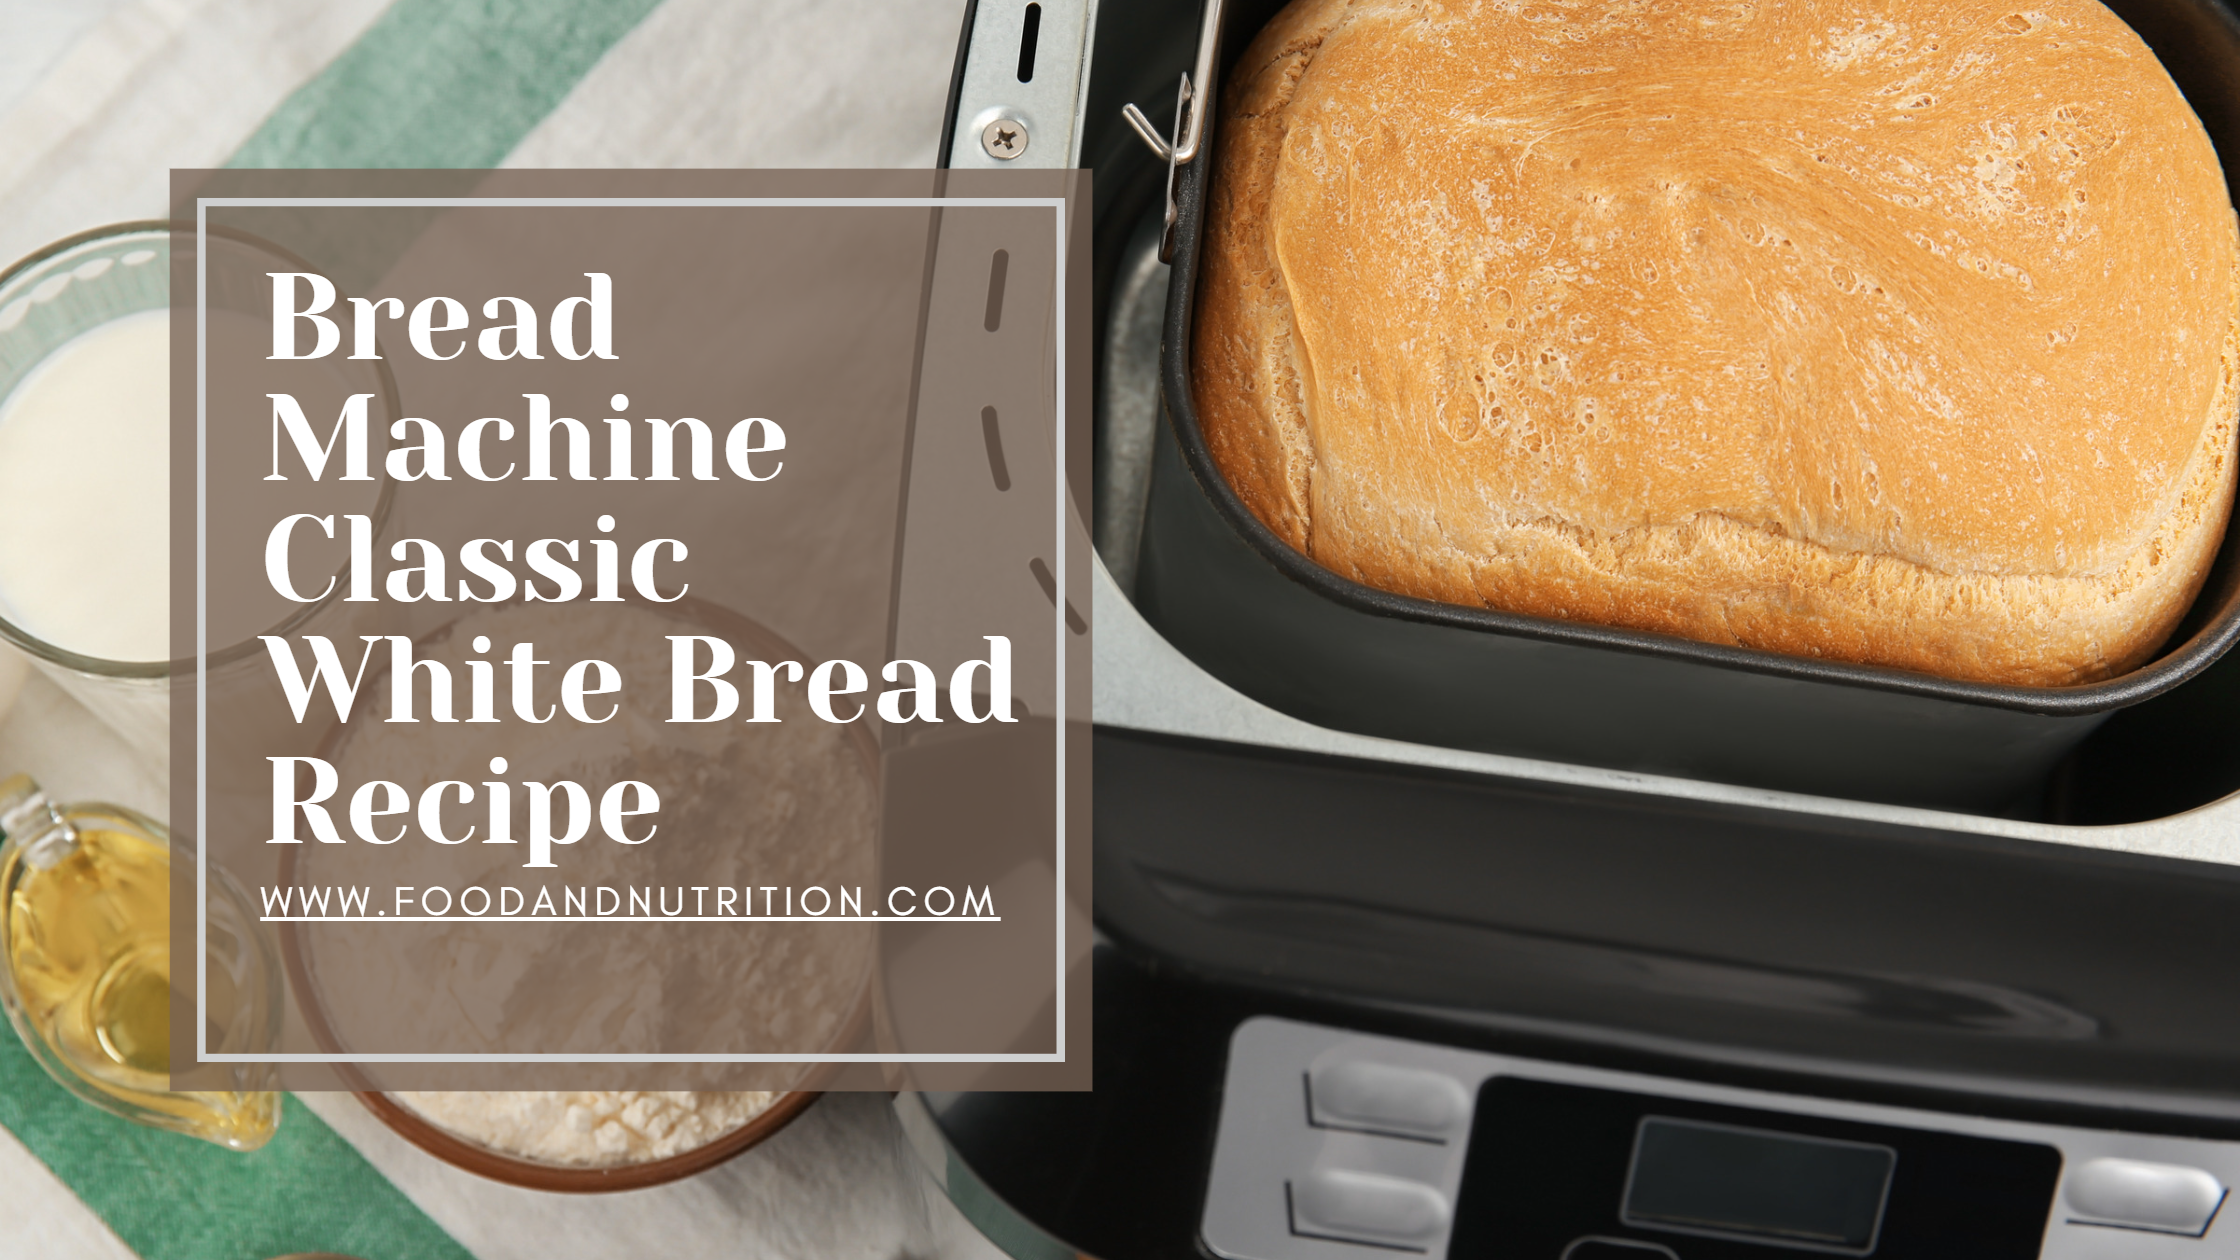 Baking Made Easy: The Foolproof Guide to Classic White Bread with a Bread Machine